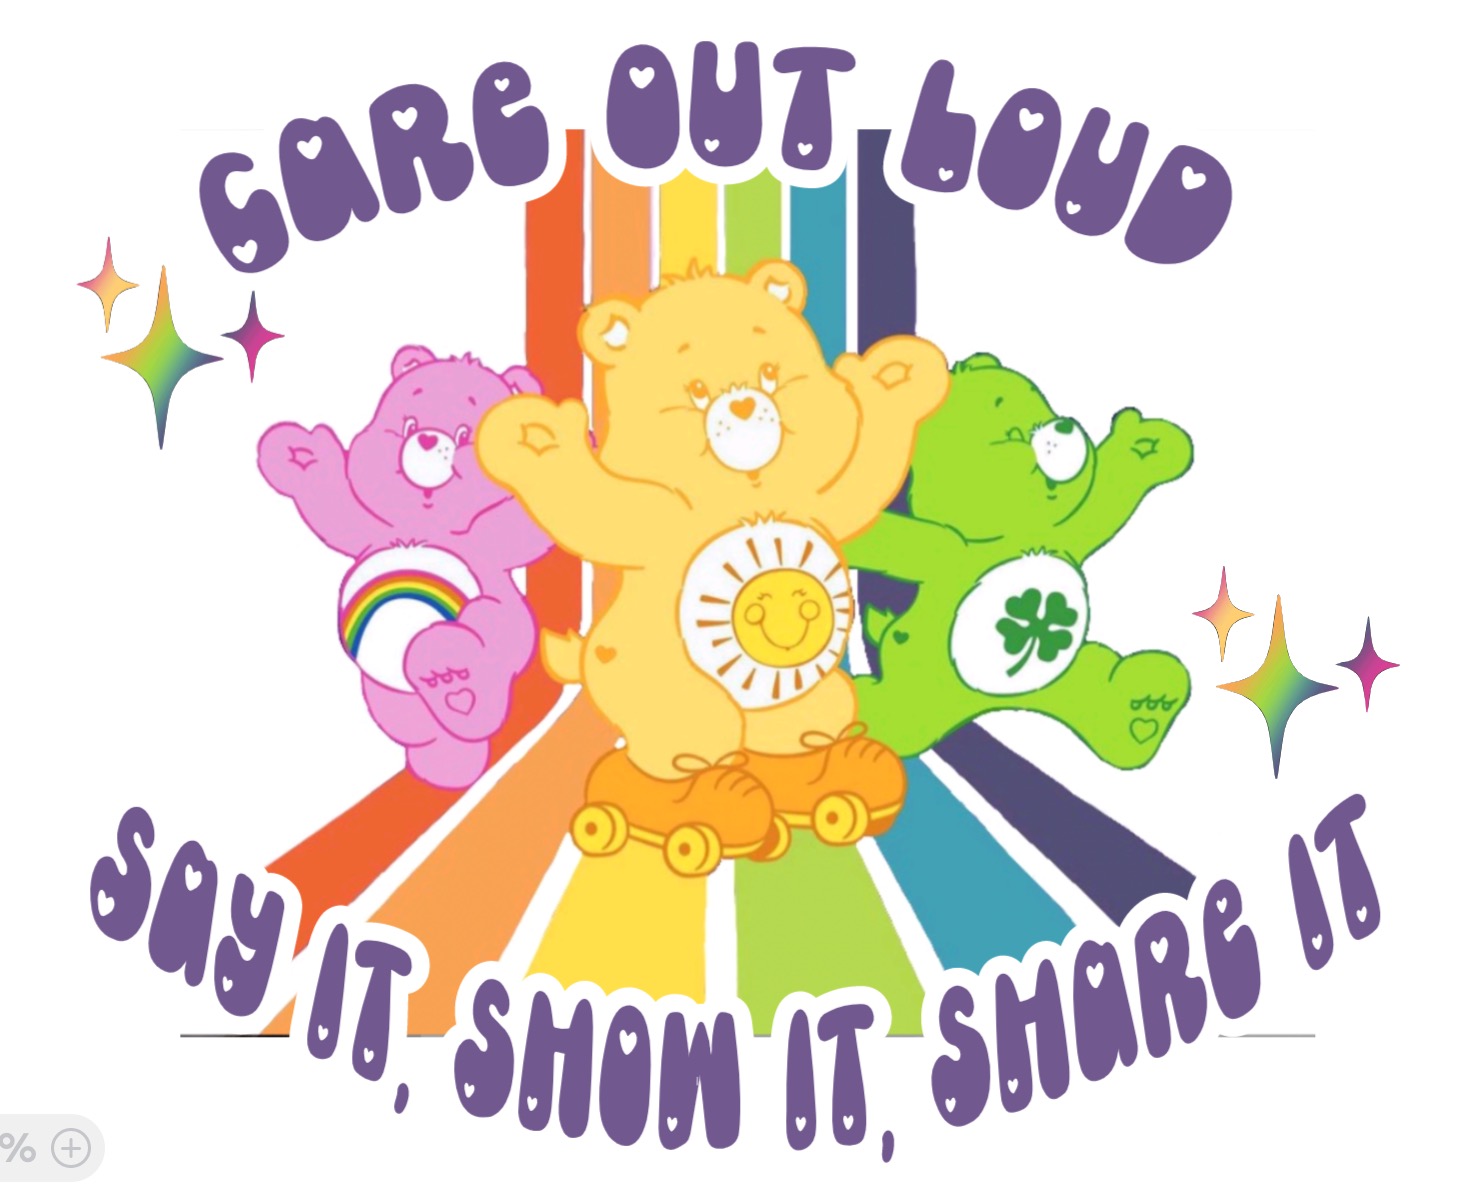 Care Out Loud!